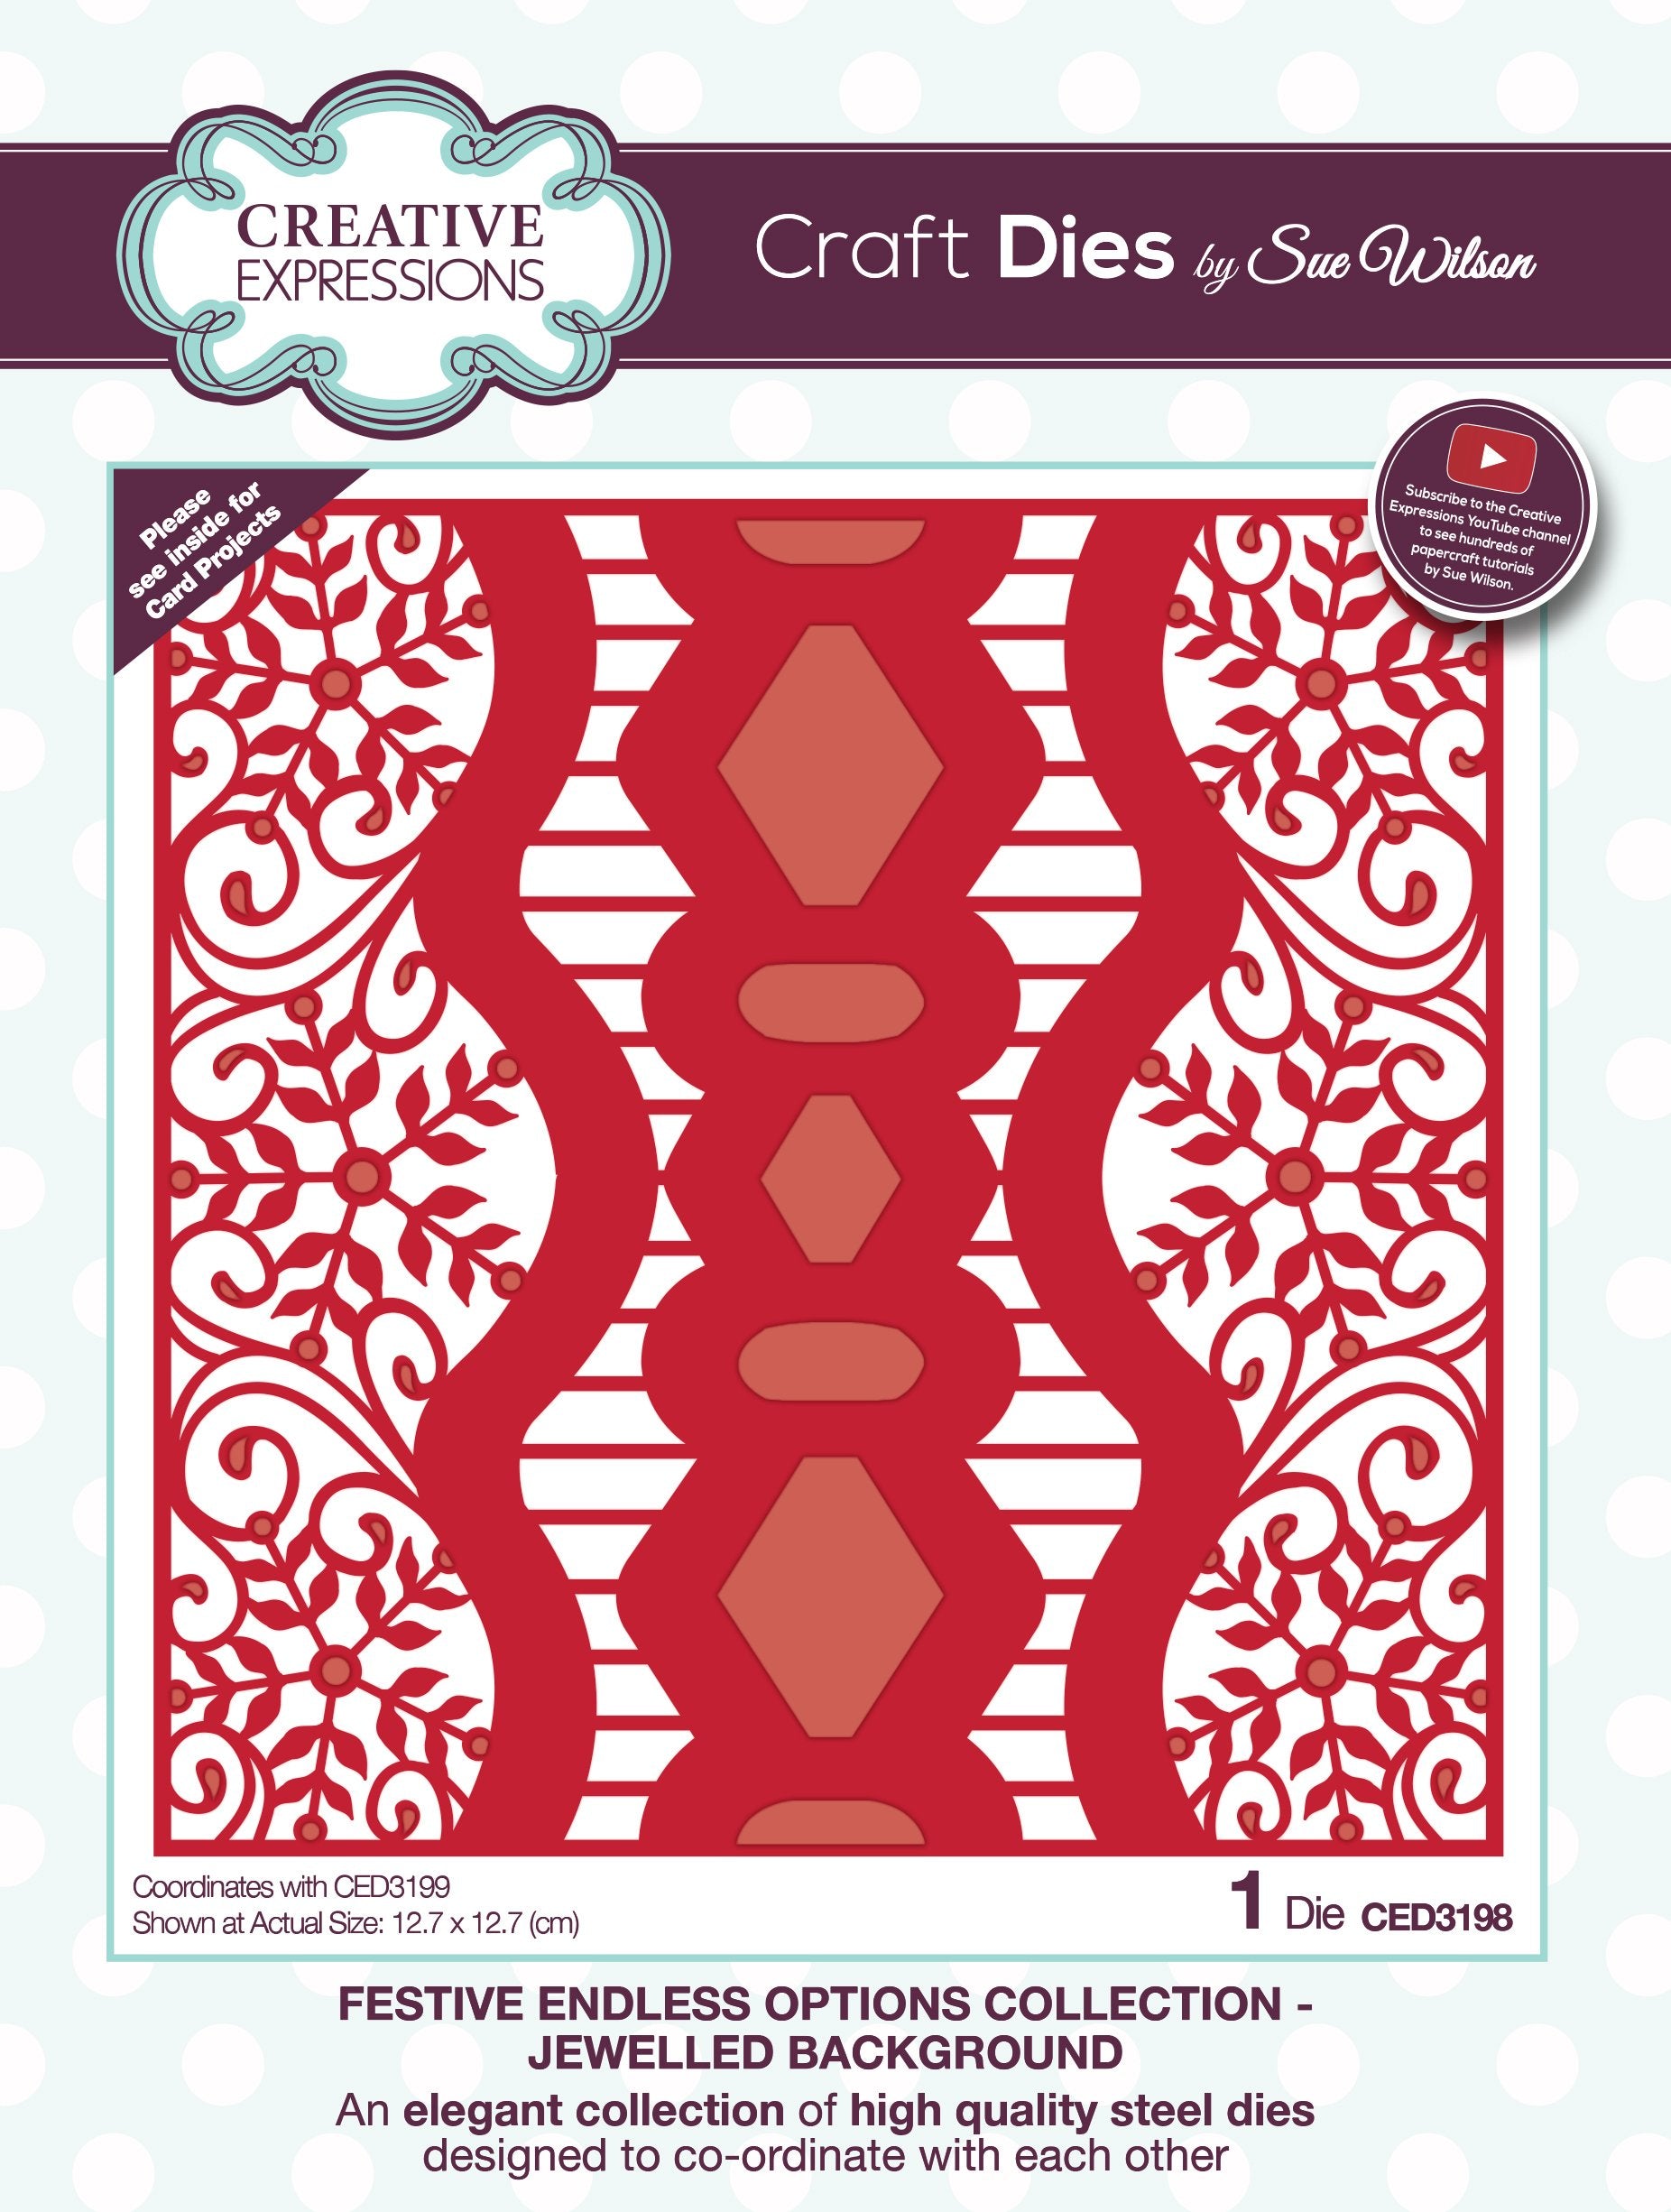 Dies by Sue Wilson Festive Endless Options Jewelled Background